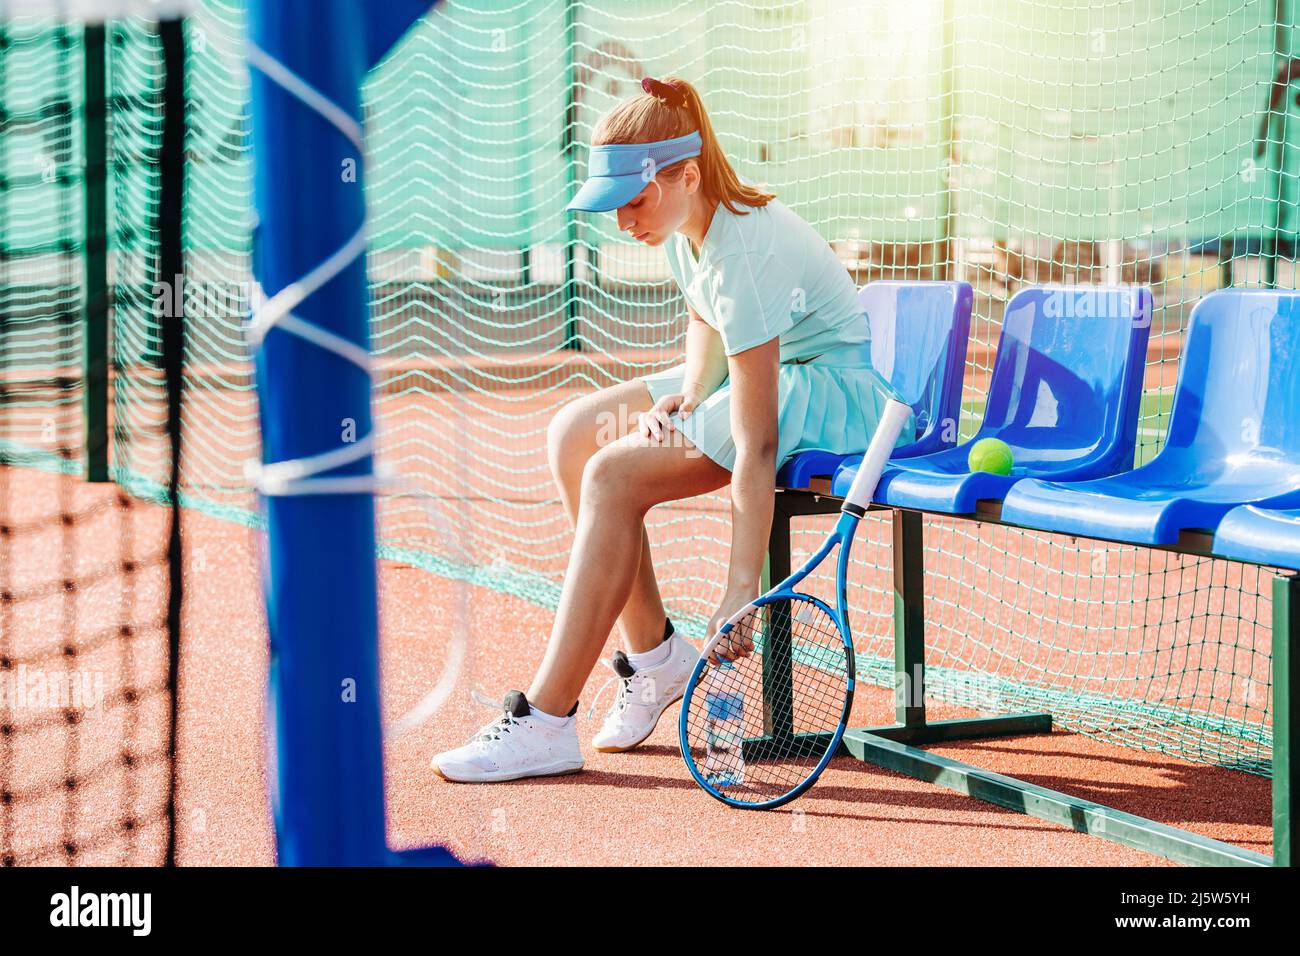 Tired weak girl resting on a plastic chair bench on an outdoor tennis court. Lit by an evening sun. High net behind her. Stock Photo